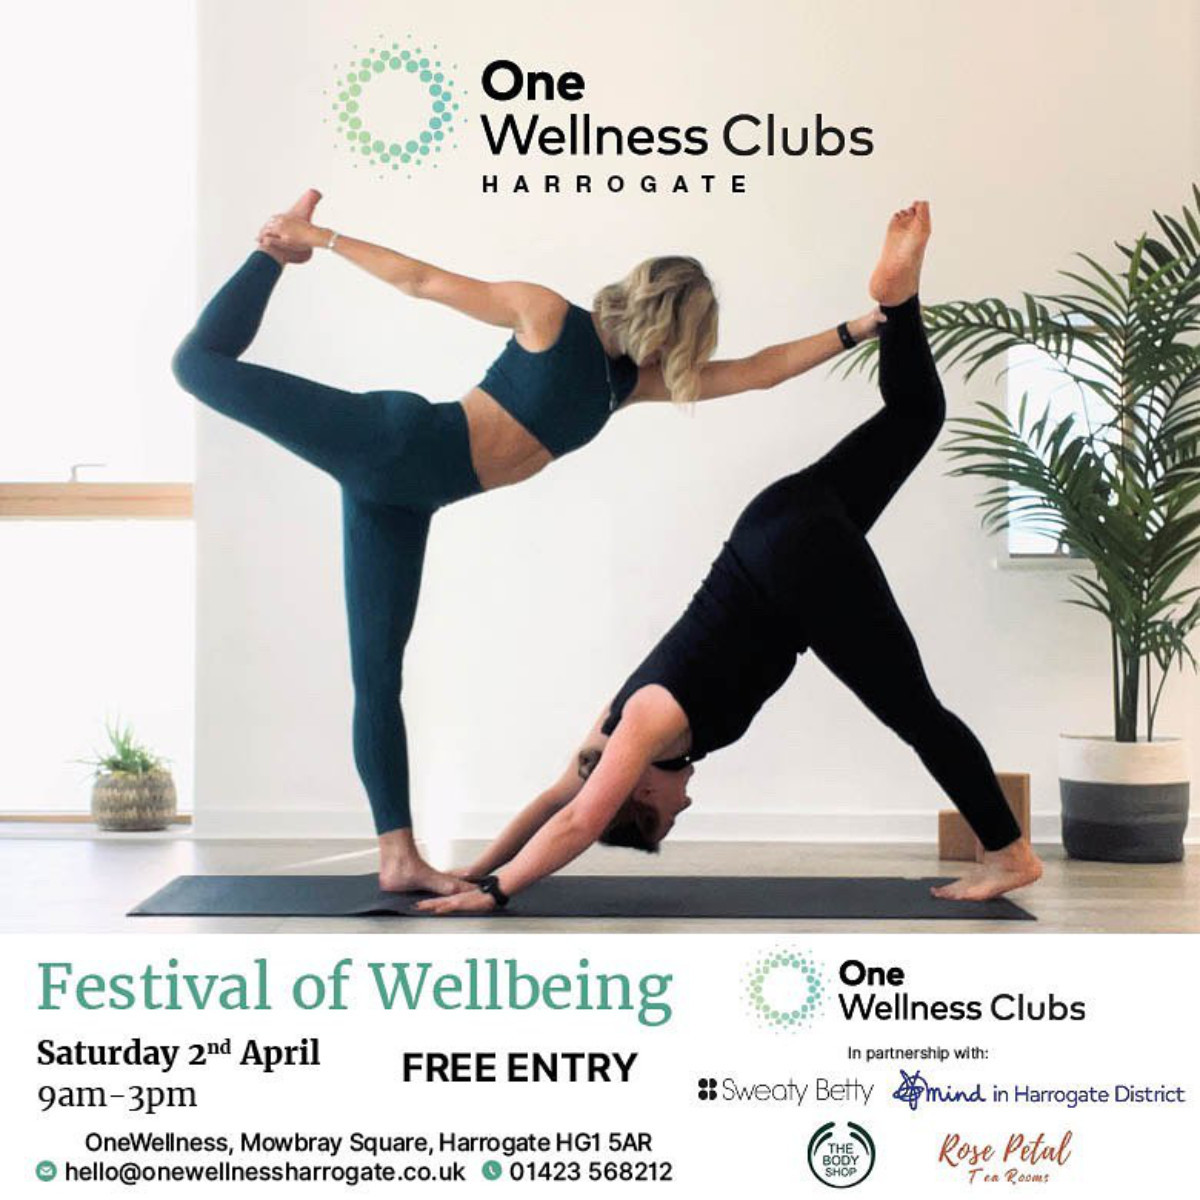 Festival of Wellbeing in Harrogate 3rd edition: what to expect and do at this community event